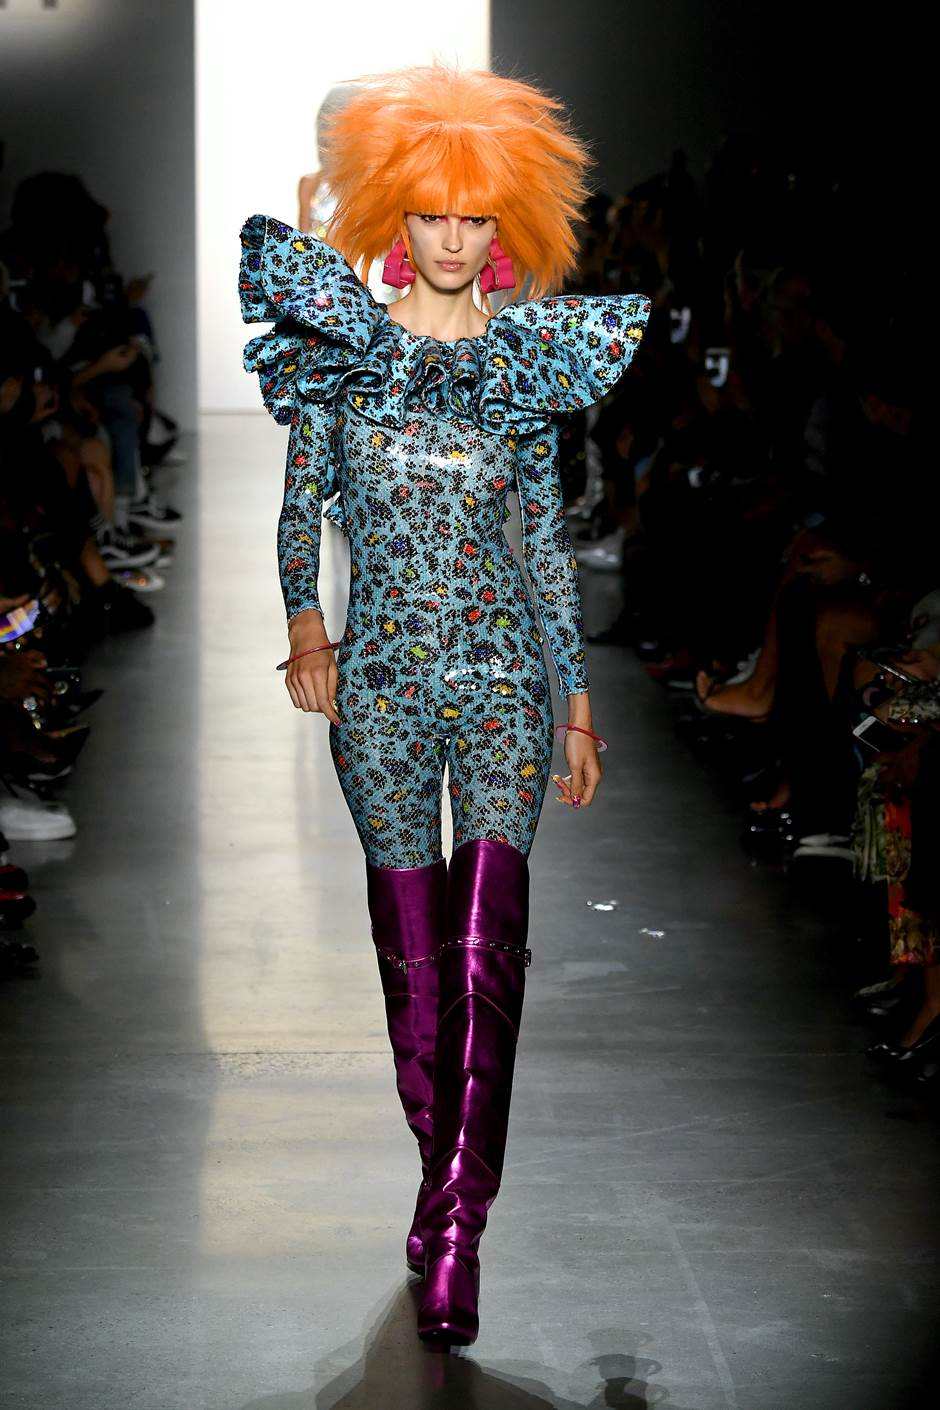 Mike Coppola/Getty Images for NYFW: The Shows via Getty Images